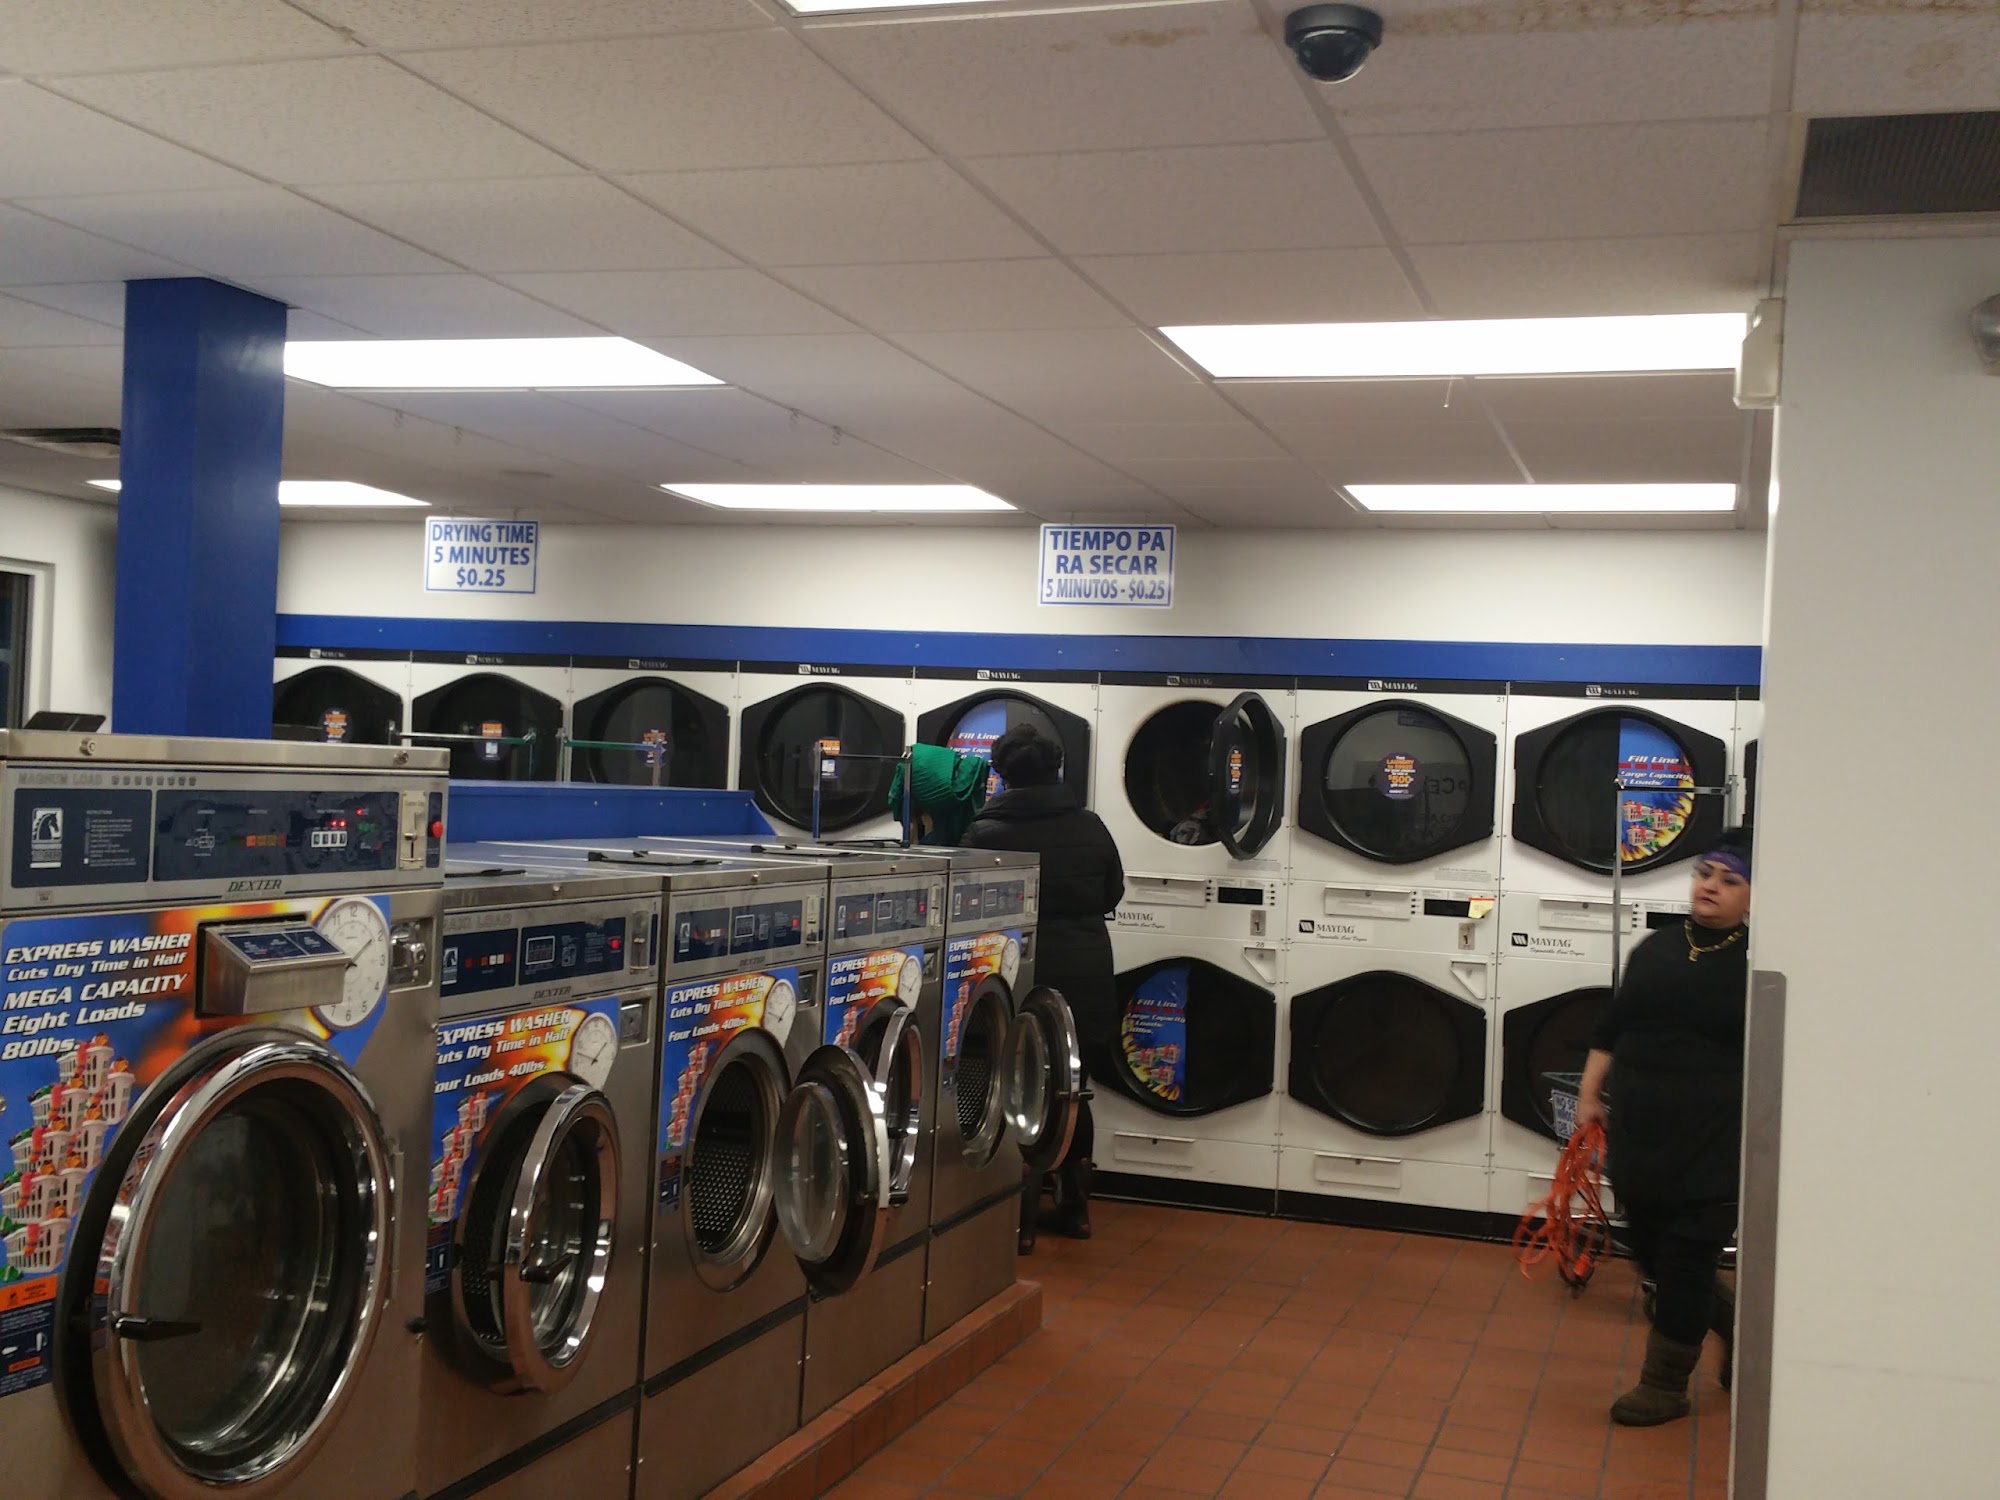 Military Coin Laundry